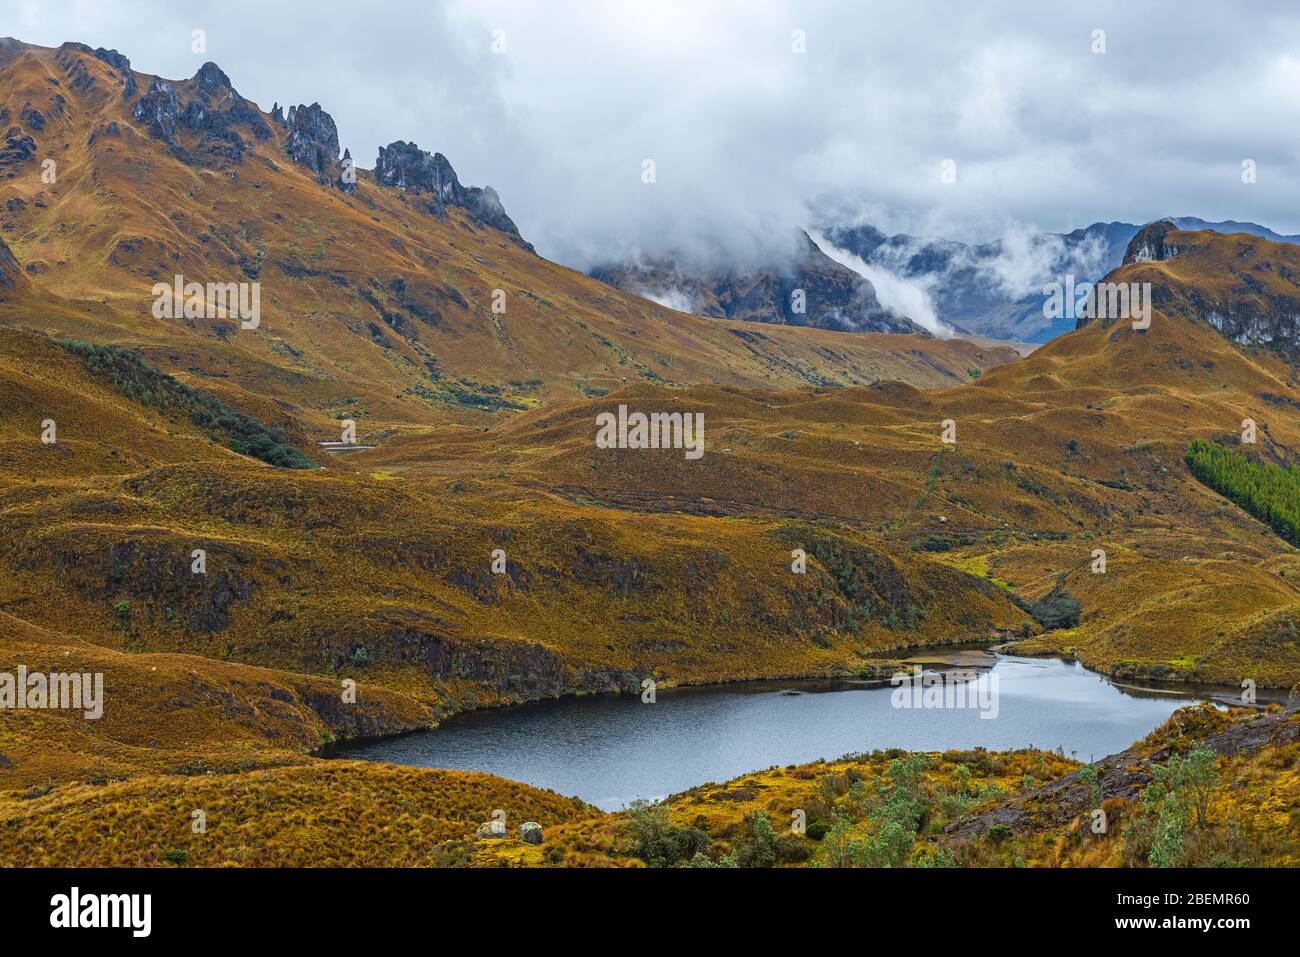 A day of Nostalgia inside Cajas national park with one of its more than 200 lagoons in the Andes paramo, Cuenca Region, Azuay province, Ecuador. Stock Photo